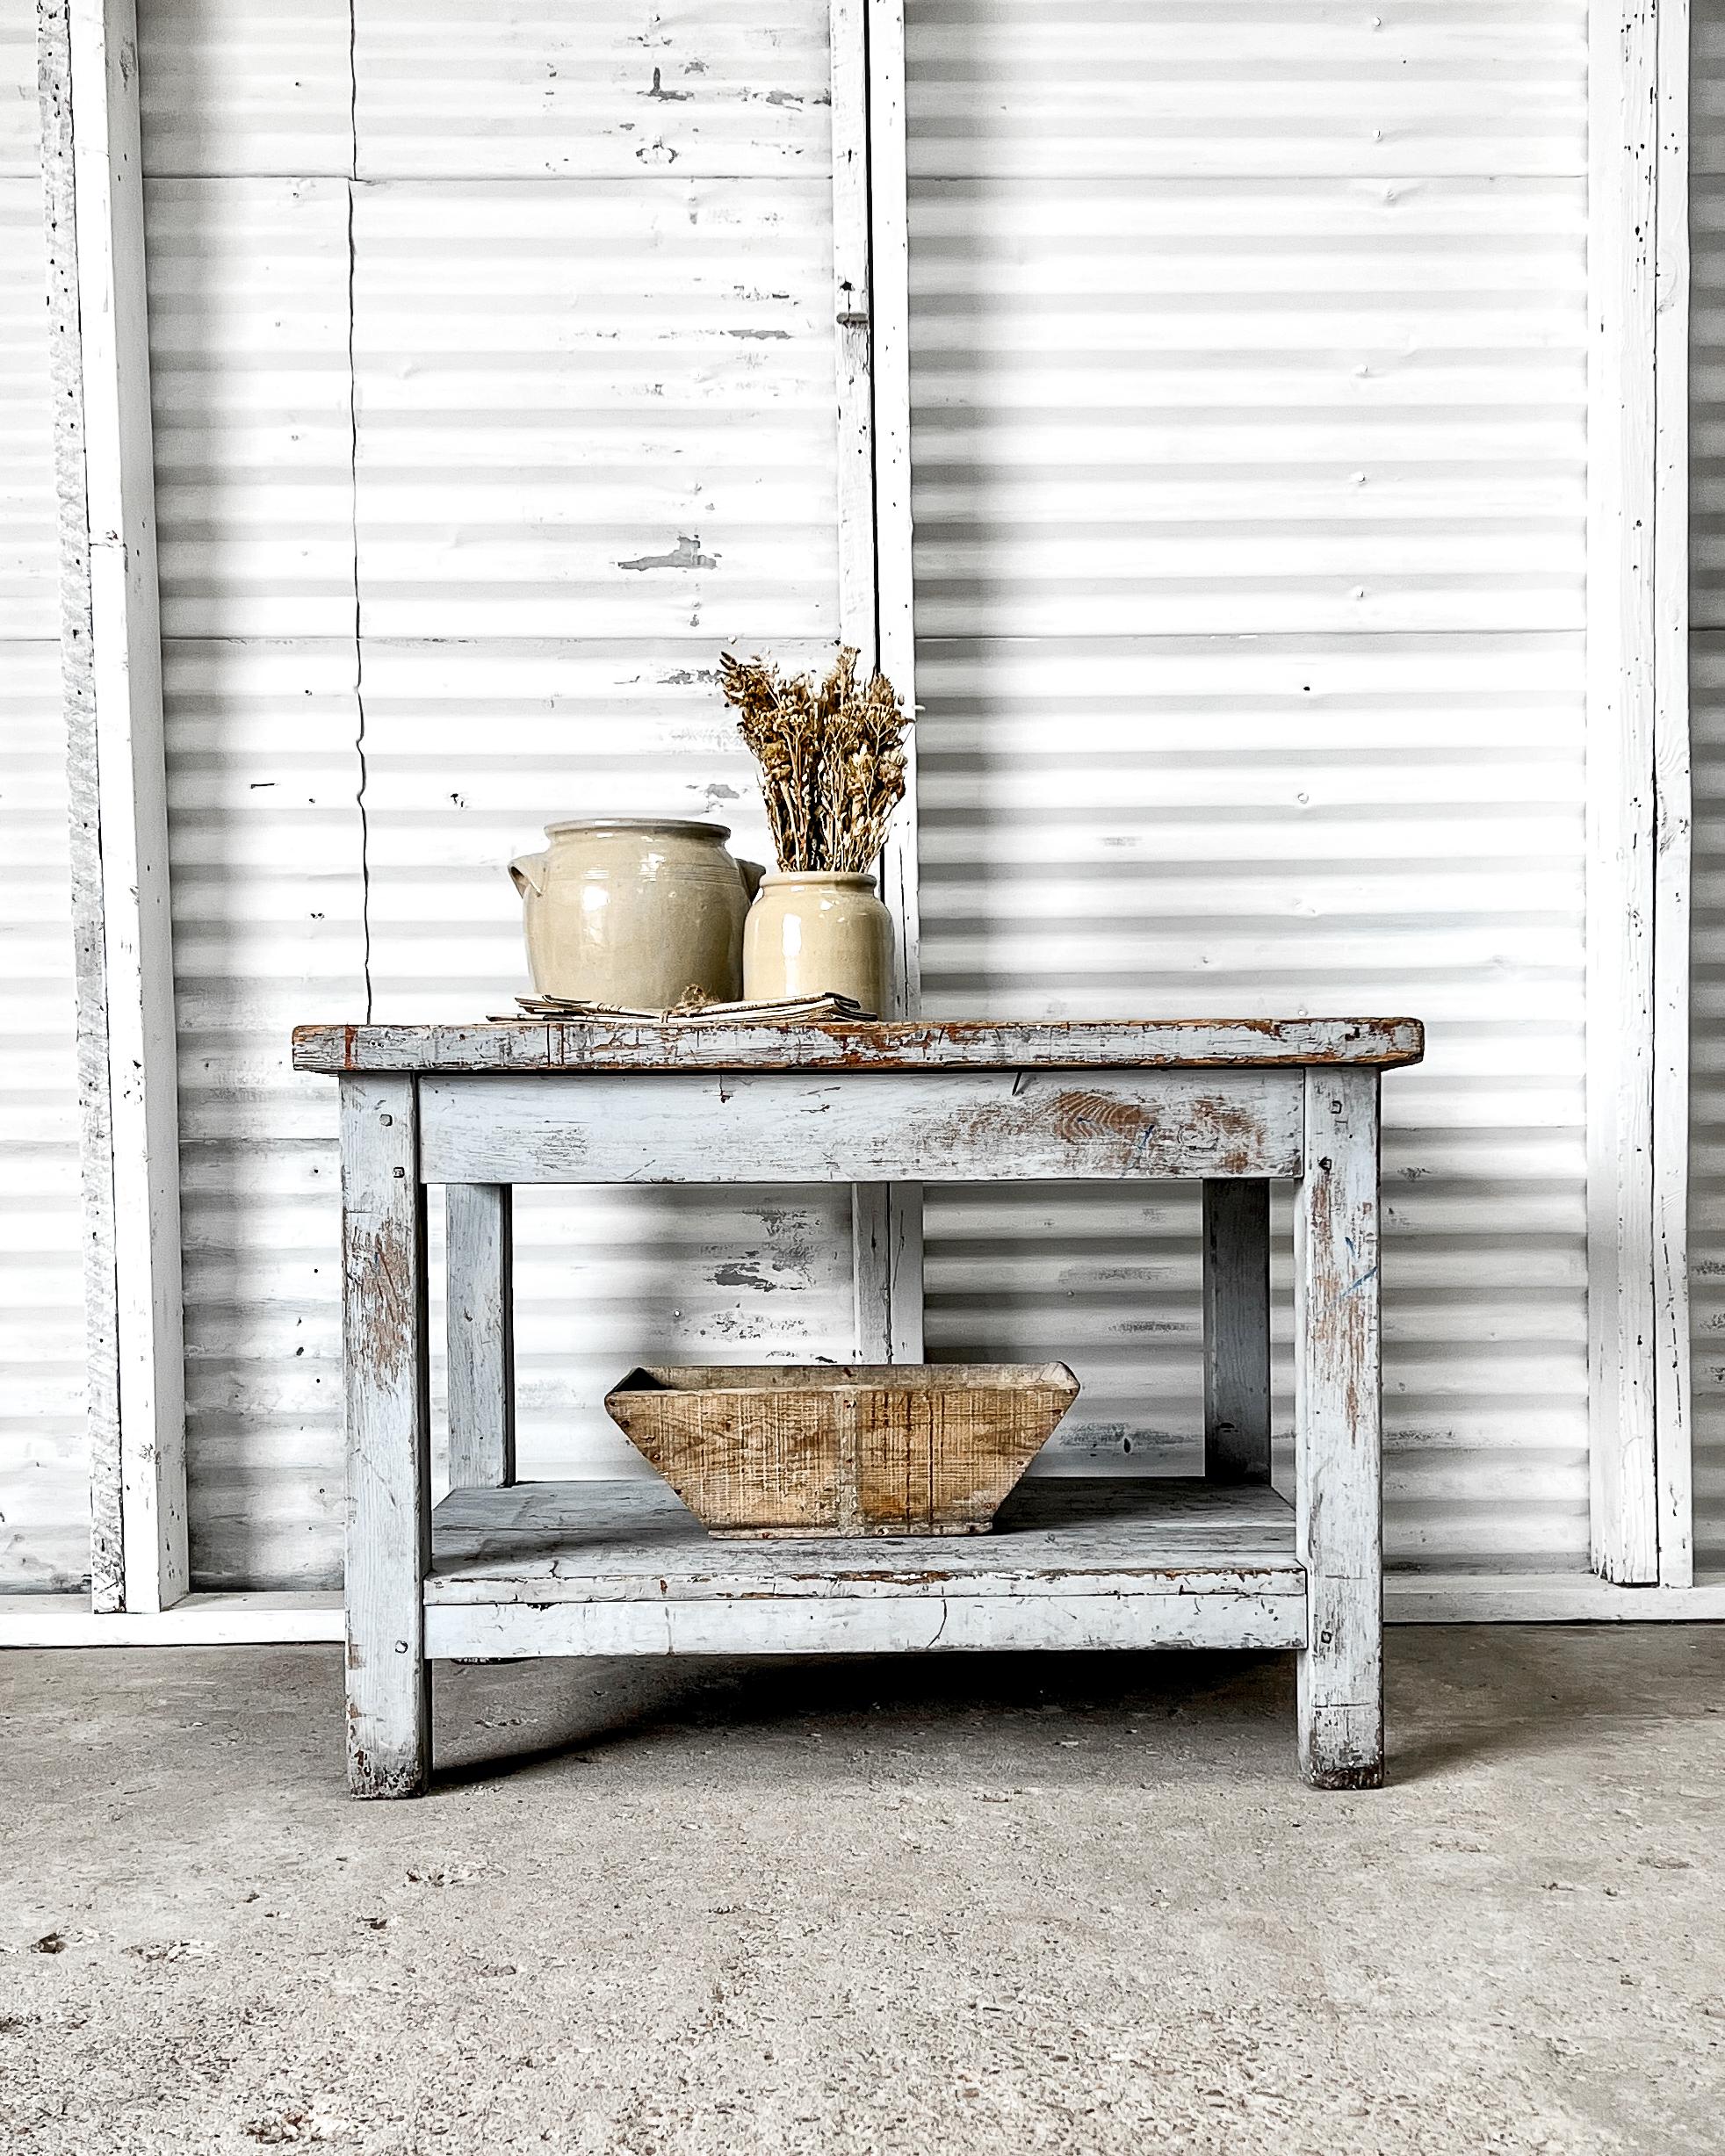 Sturdy and functional, this wonderful old French workshop table features a lovely shade of “French blue” paint on its base and chunky squared legs. The raw, natural wood-planked top is weathered with a great patina. With its straightforward clean